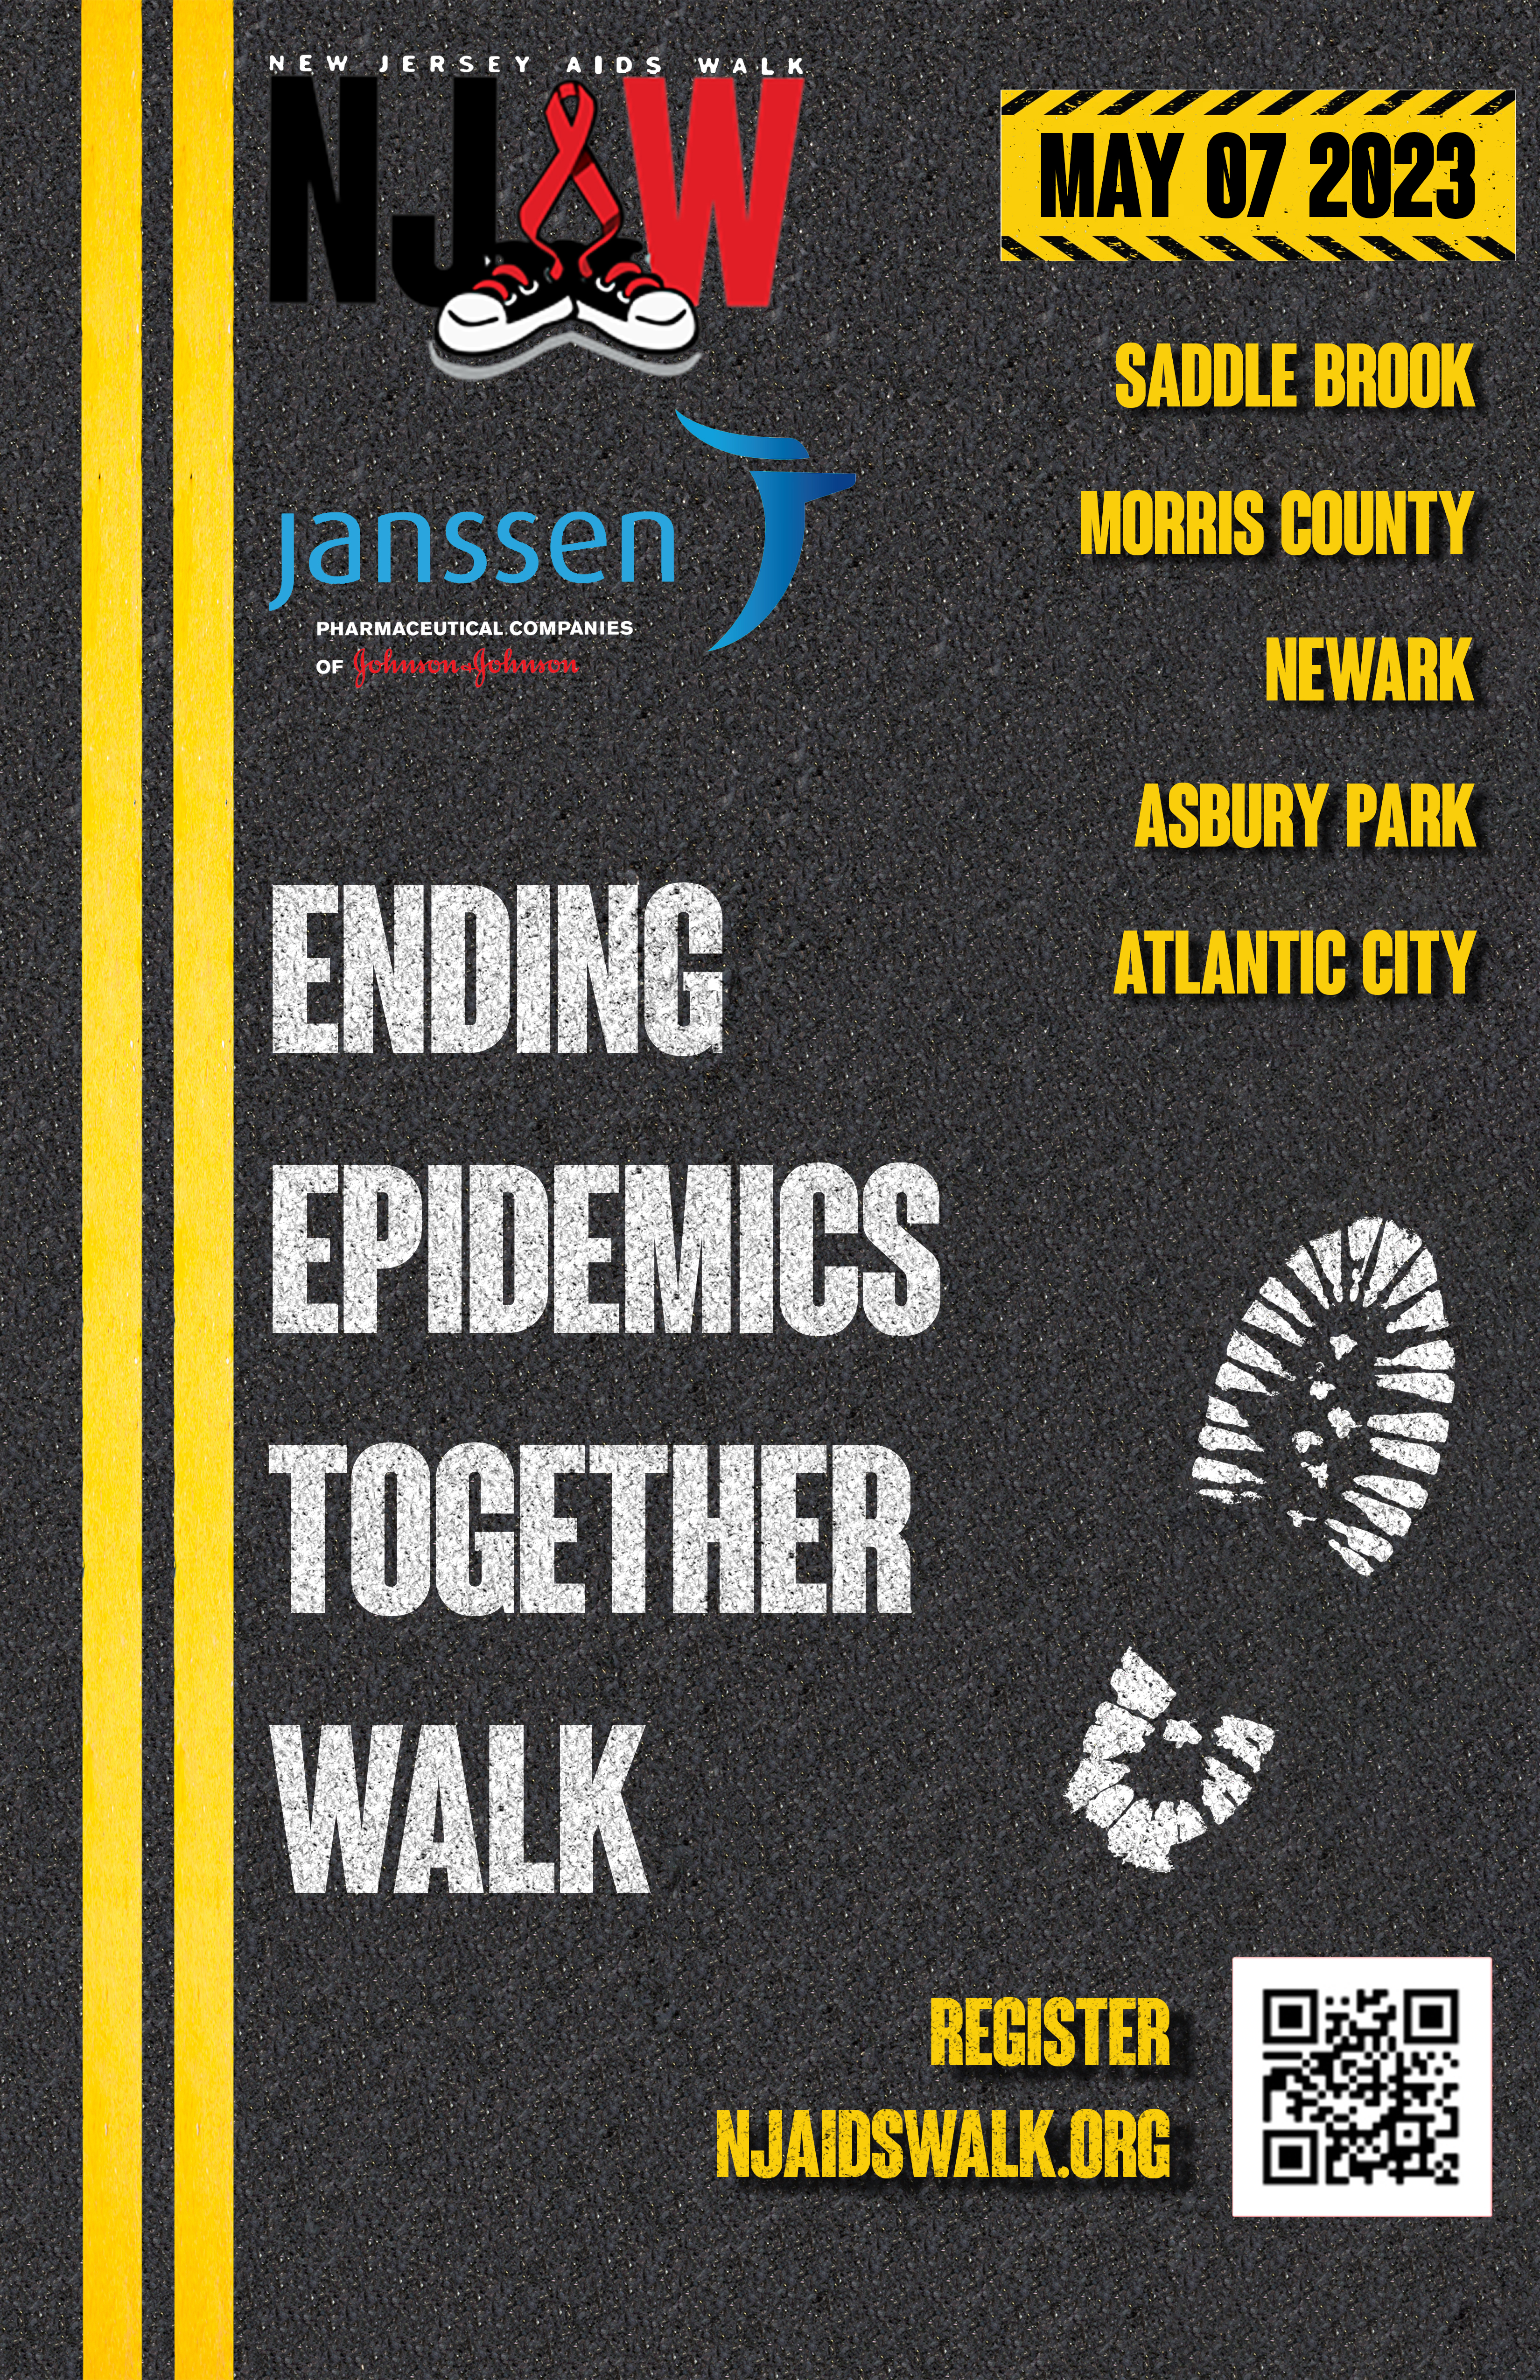 Posters I crafted for the 2023 New Jersey AIDS Walk.